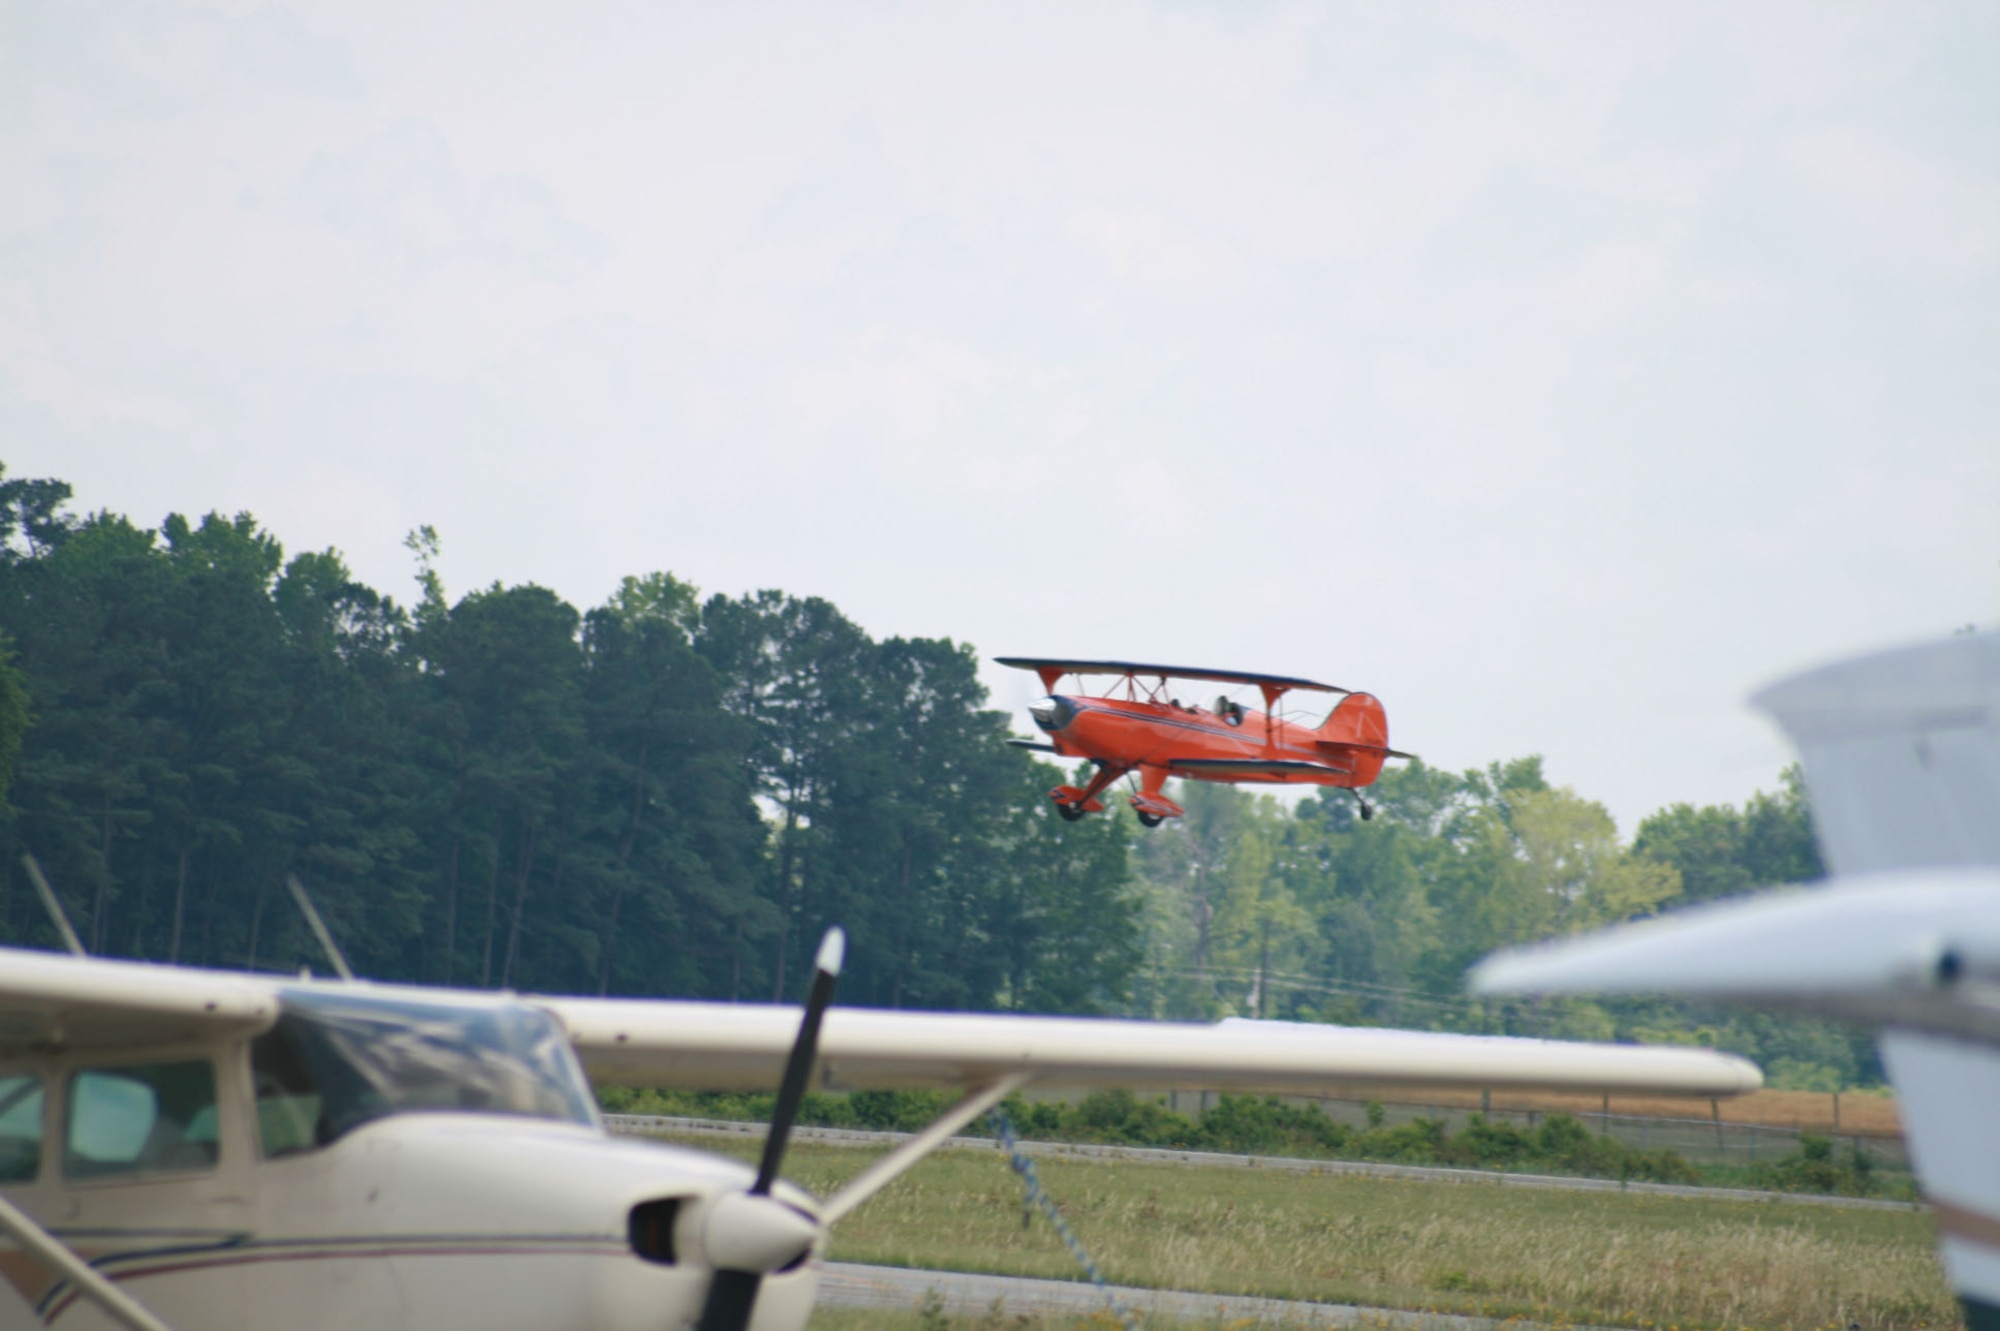 SEYMOUR JOHNSON AIR FORCE BASE, N.C. - Stephen Torrent, pilot, takes off in his Steen Skybolt May 24 during the Experimental Aircraft Association Young Eagles Day at the Goldsboro/Wayne County Municipal Airport.  More than 80 base youth participated in the day's activity.  These flights are offered free of charge and are made possible through the EAA member volunteers. (U.S. Air Force photo by Staff Sgt. Les Waters)